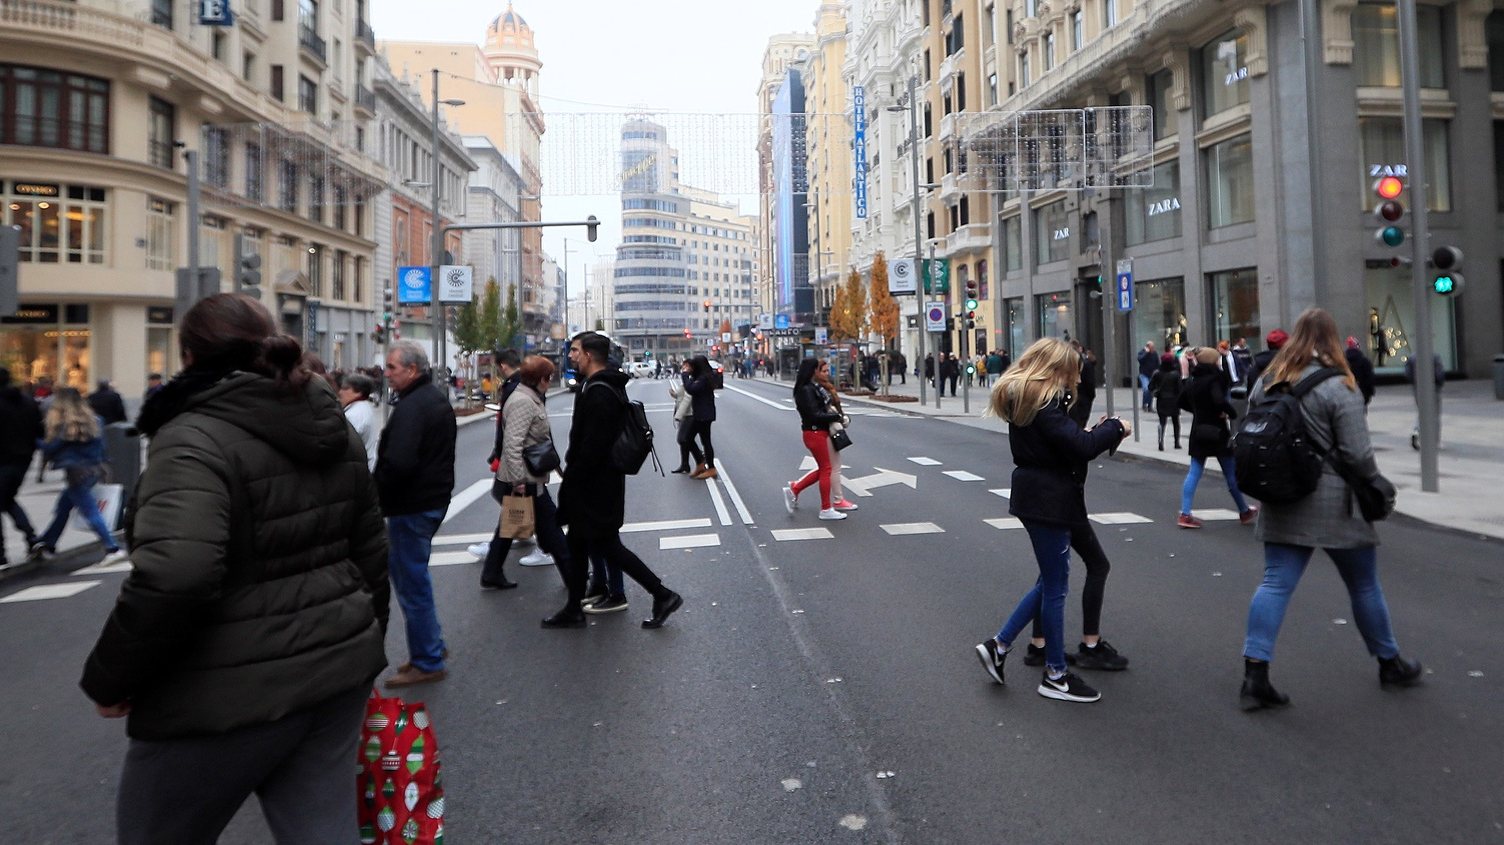 epa07204011 People walk in Gran Via street in Madrid, Spain, 02 December 2018. On 30 November 2018 Madrid city council introduced Madrid Central, a restricted area for private cars to reduce gas emissions in the city center. Madrid Central is a 472 hectares of the city center off-limits to traffic, except for local residents and public transportation.  EPA/FERNANDO ALVARADO